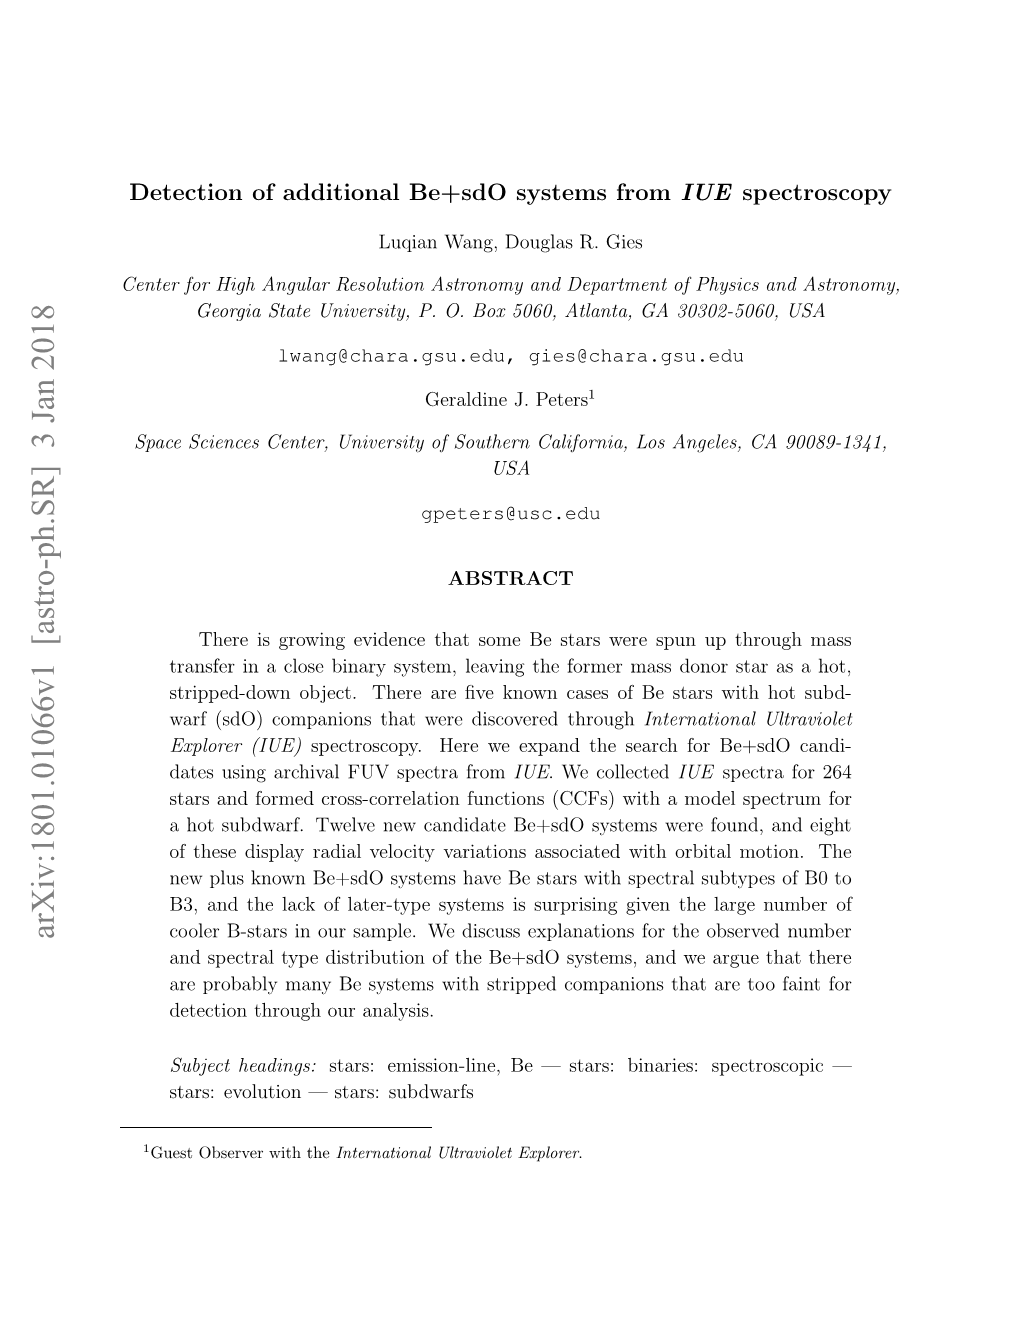 Detection of Additional Be+ Sdo Systems from IUE Spectroscopy